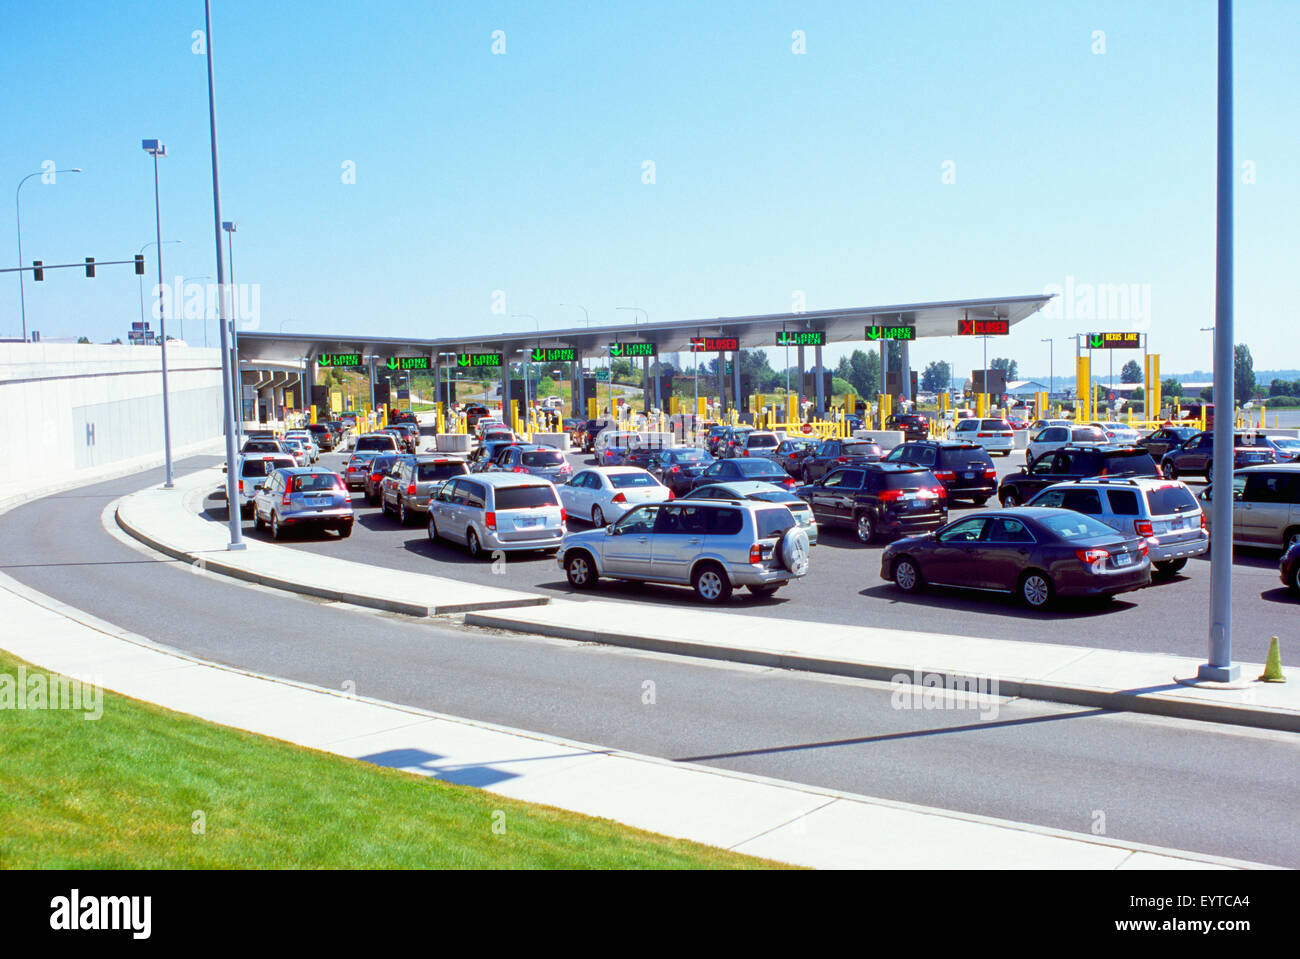 Peace Arch Border Crossing, Surrey, British Columbia, Canada - Cars waiting in Line to enter Blaine, Washington State, USA Stock Photo